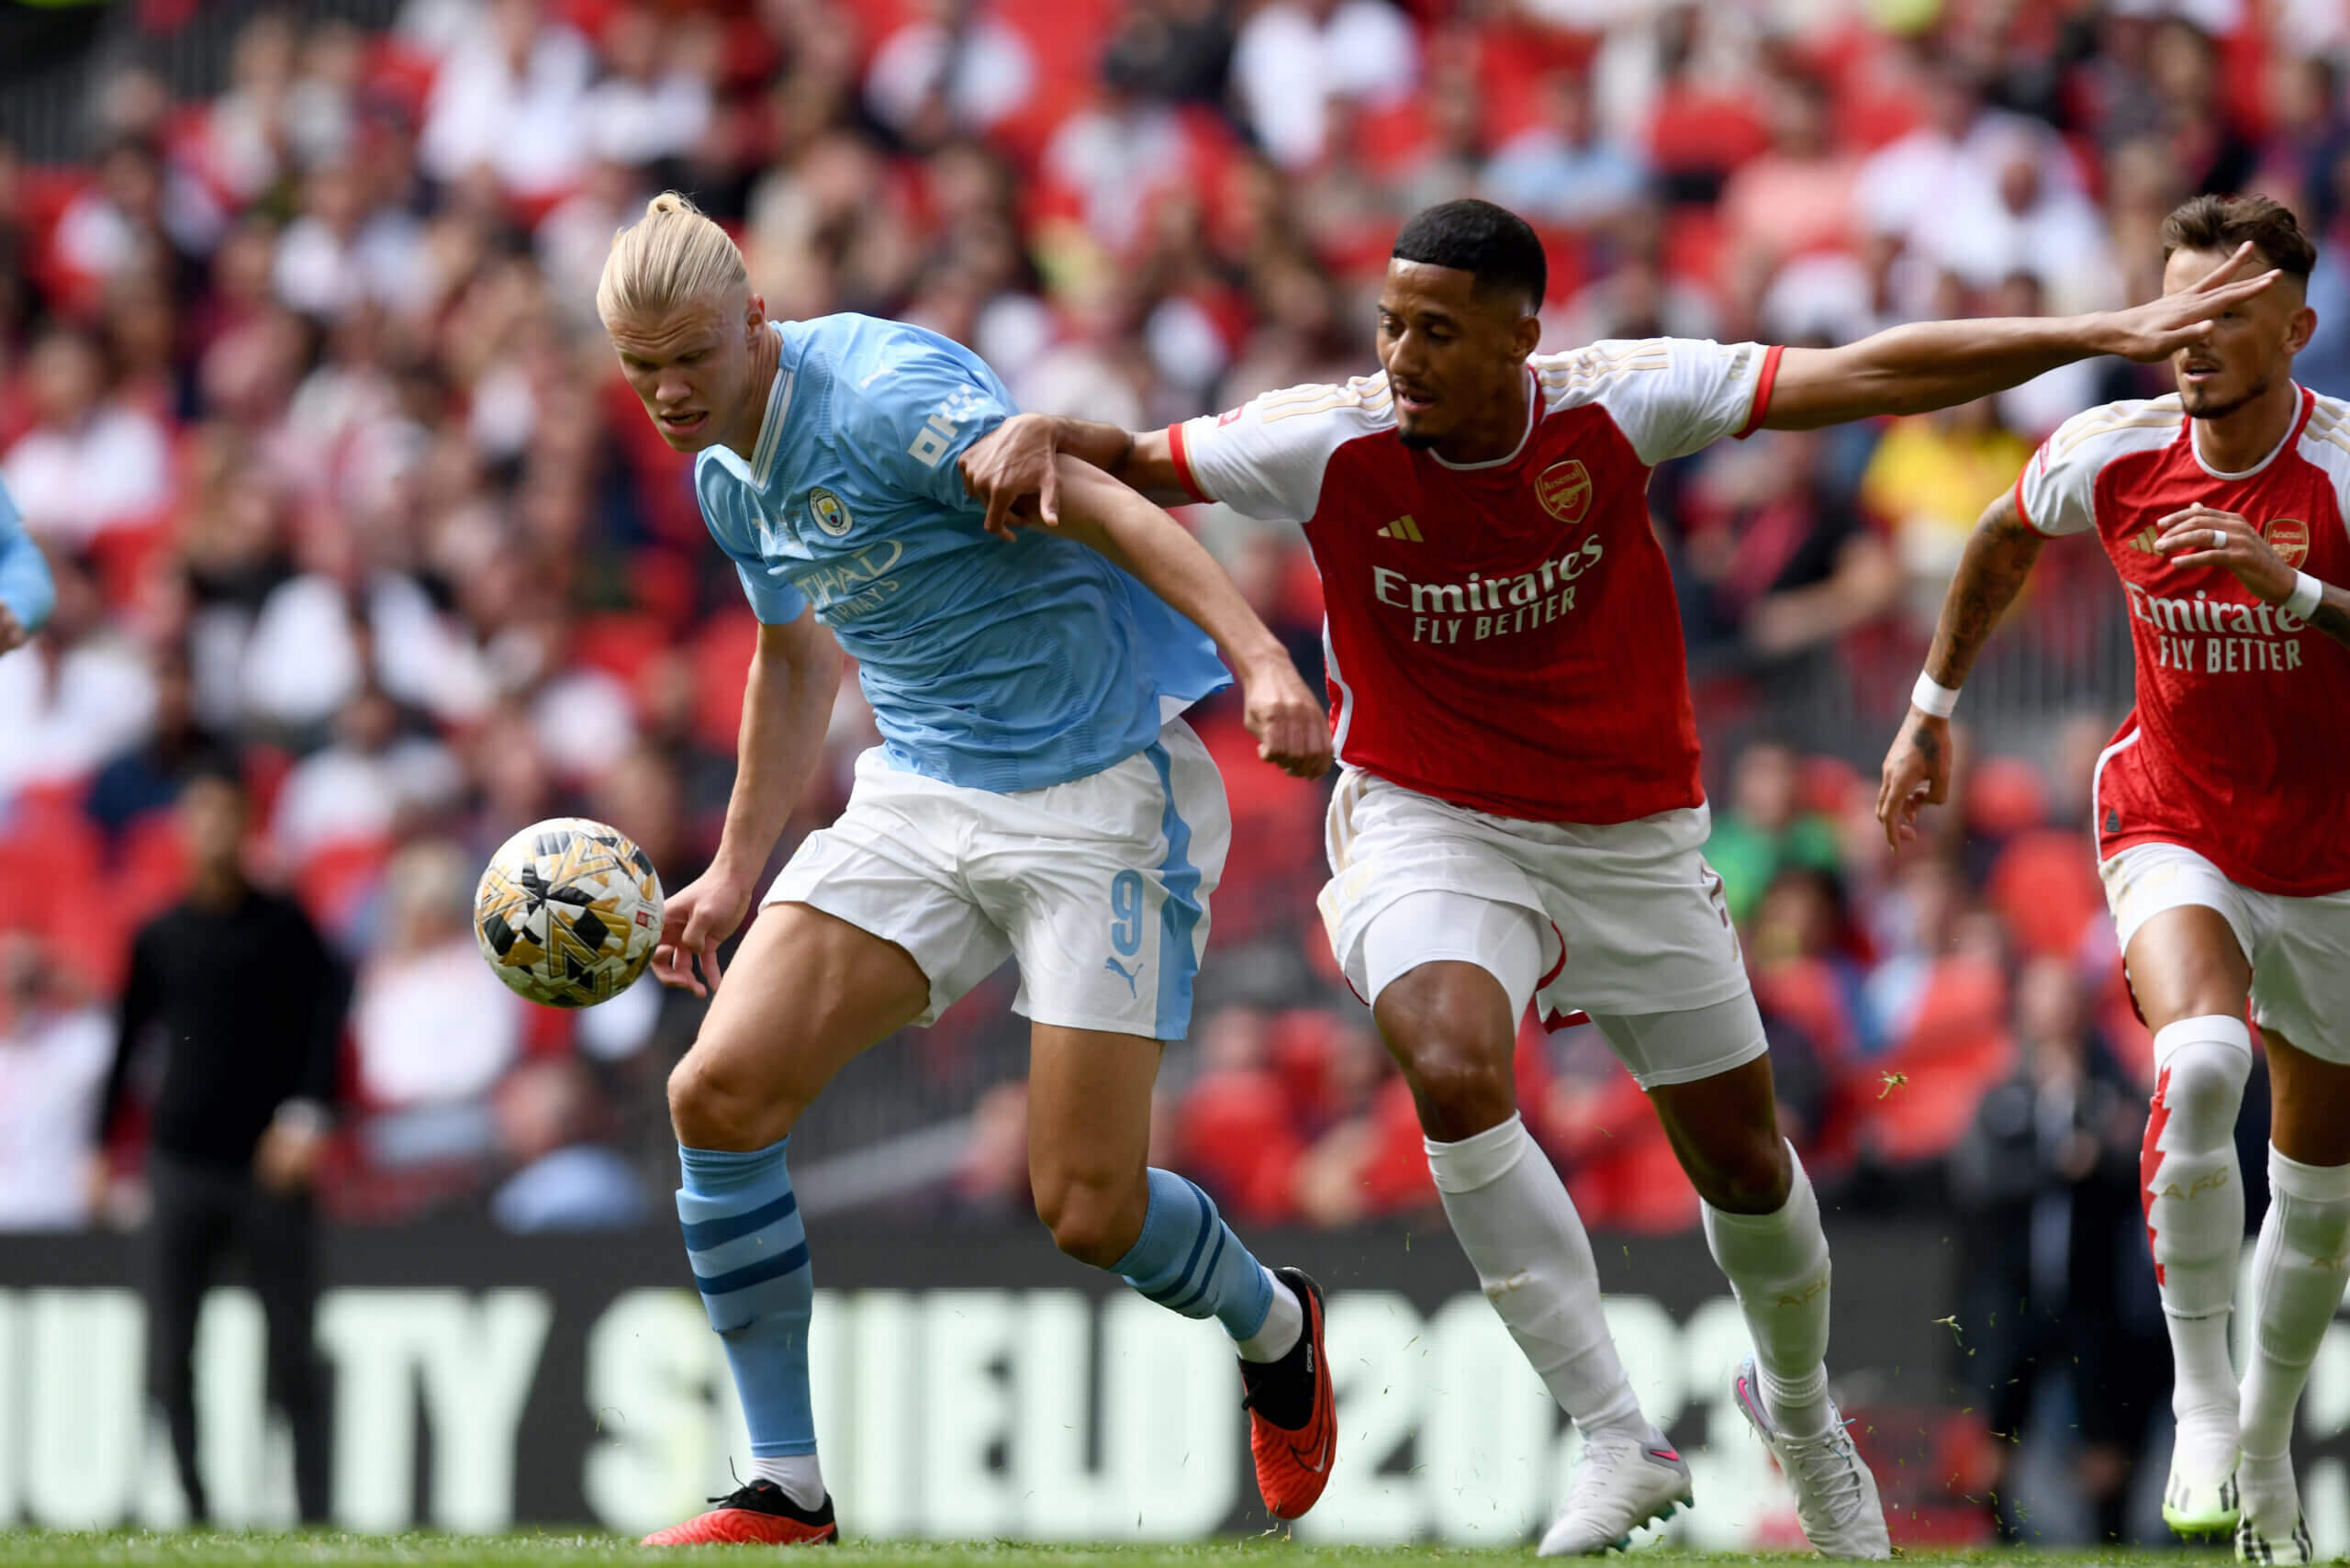 Arsenal 1-0 City: Extended highlights